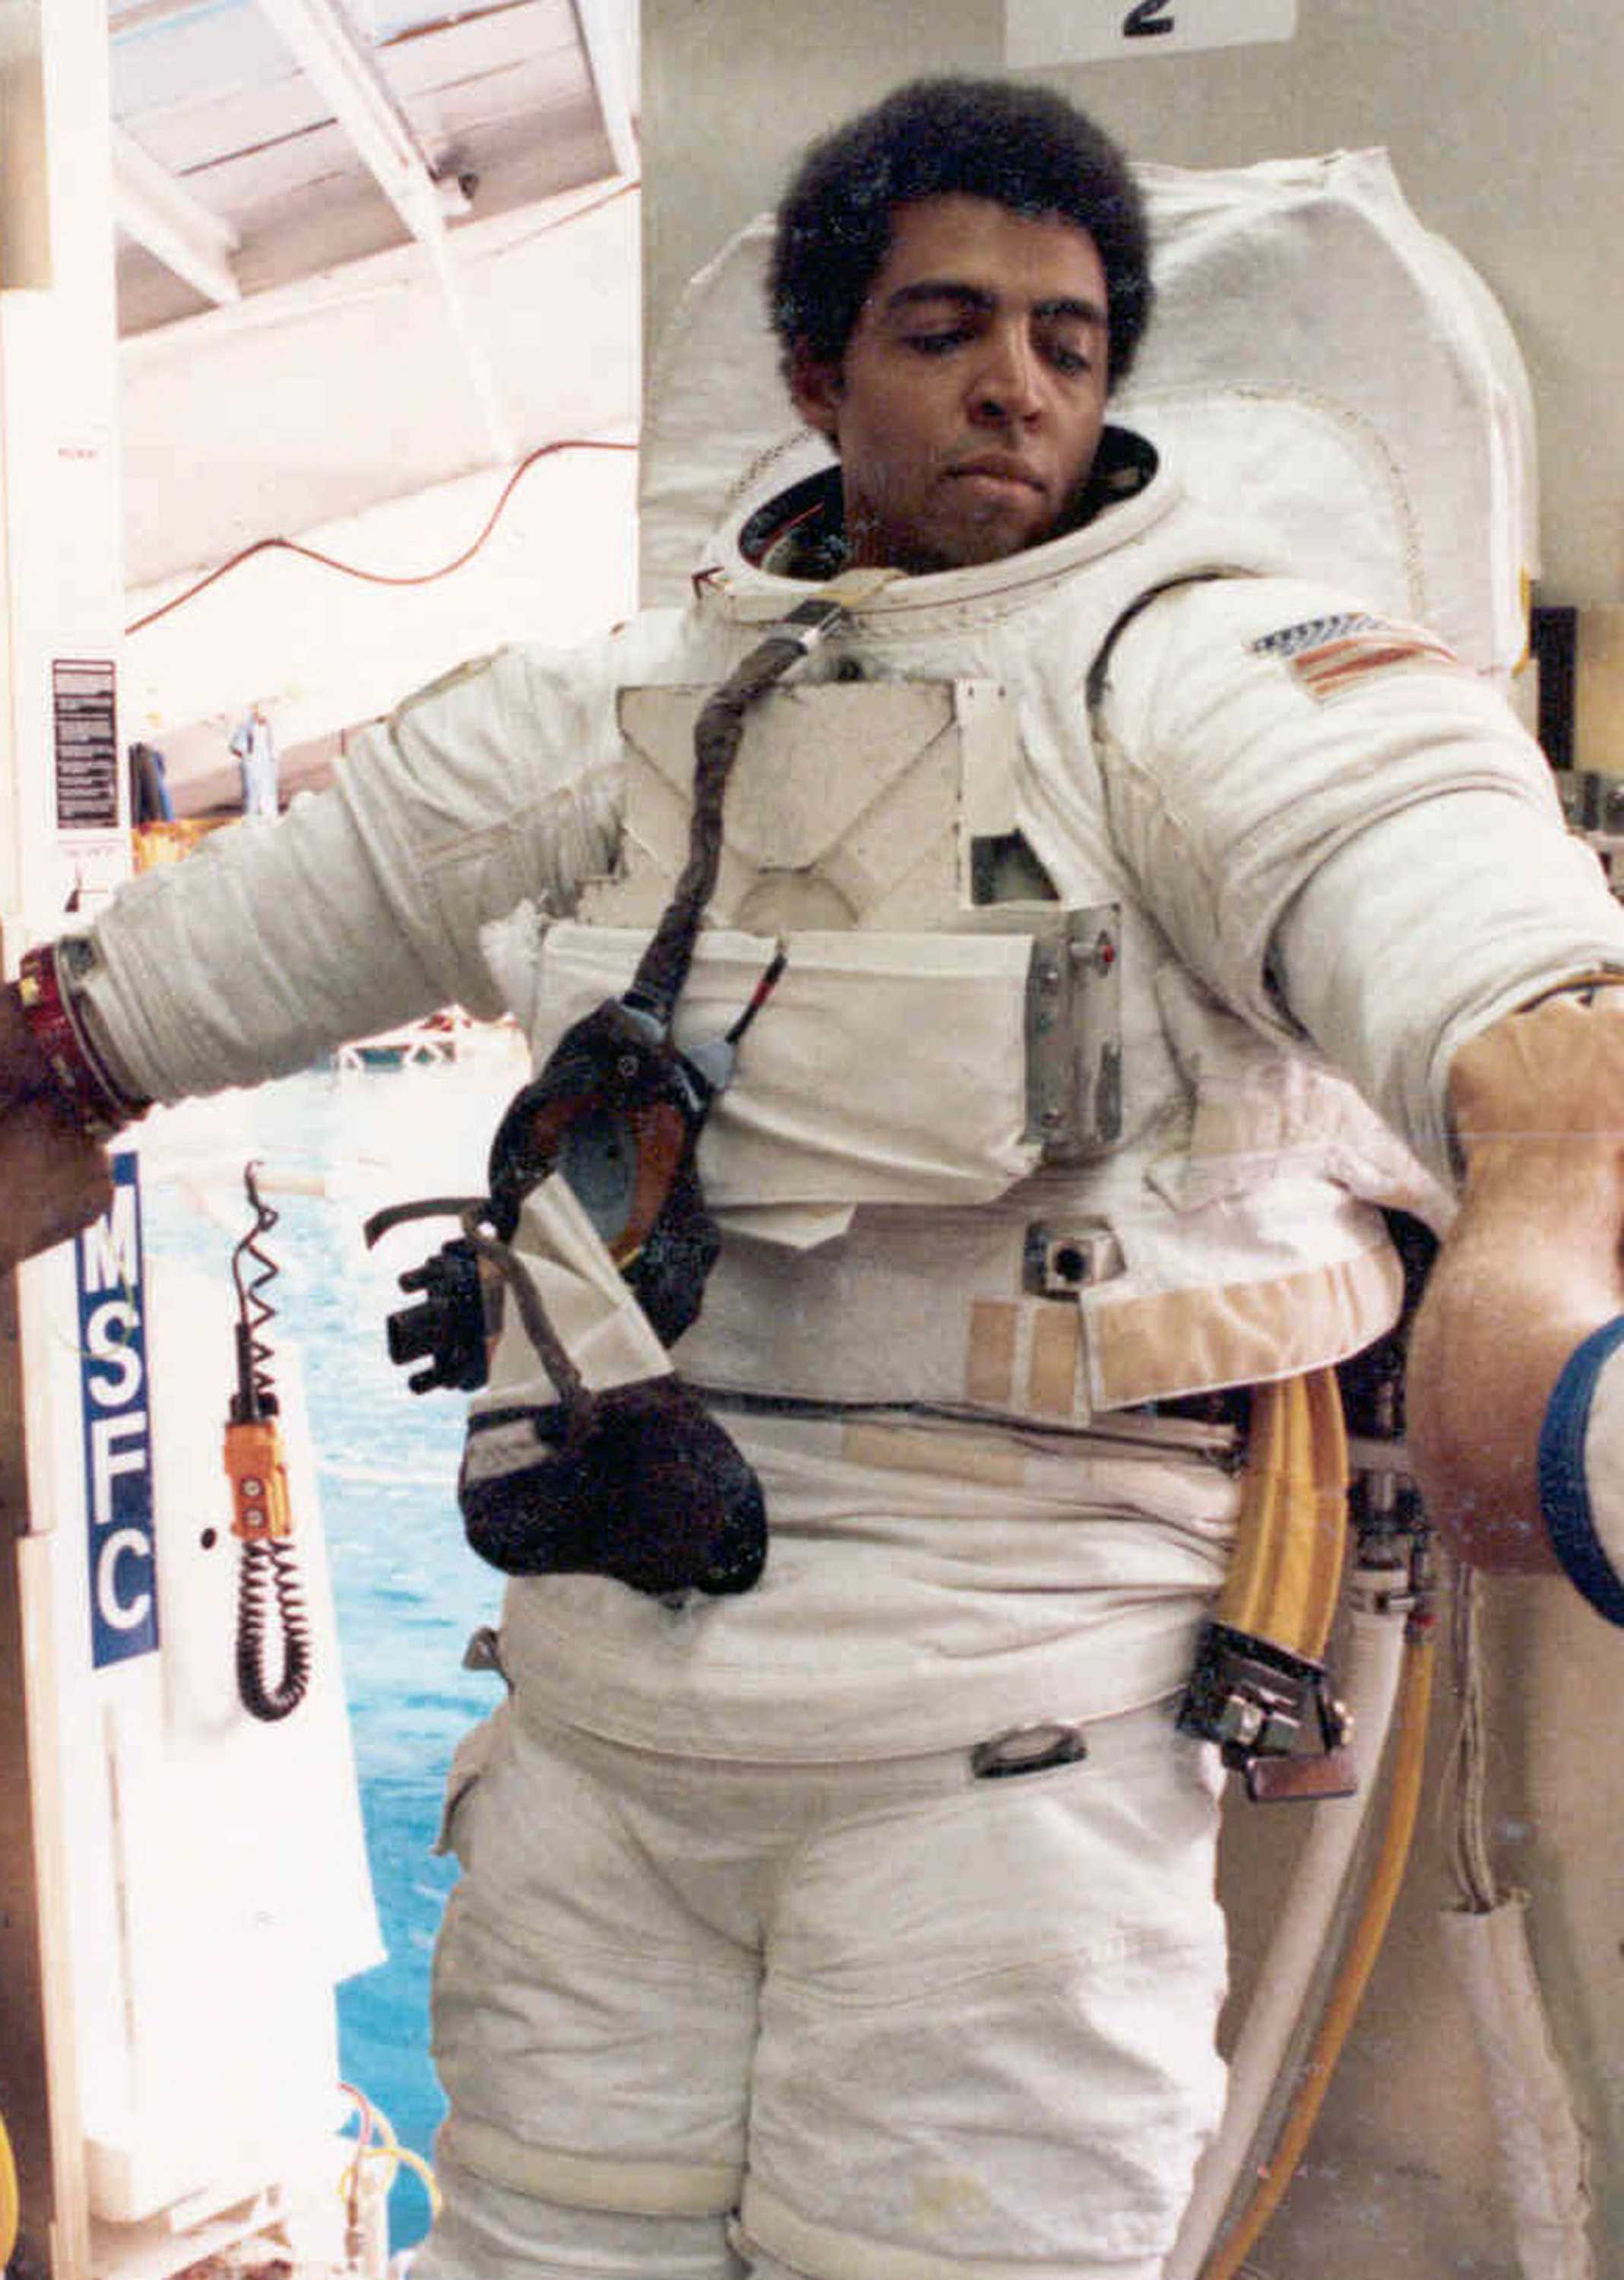 Livingston Holder is getting his white Space suit adjusted as he leans against a wall.